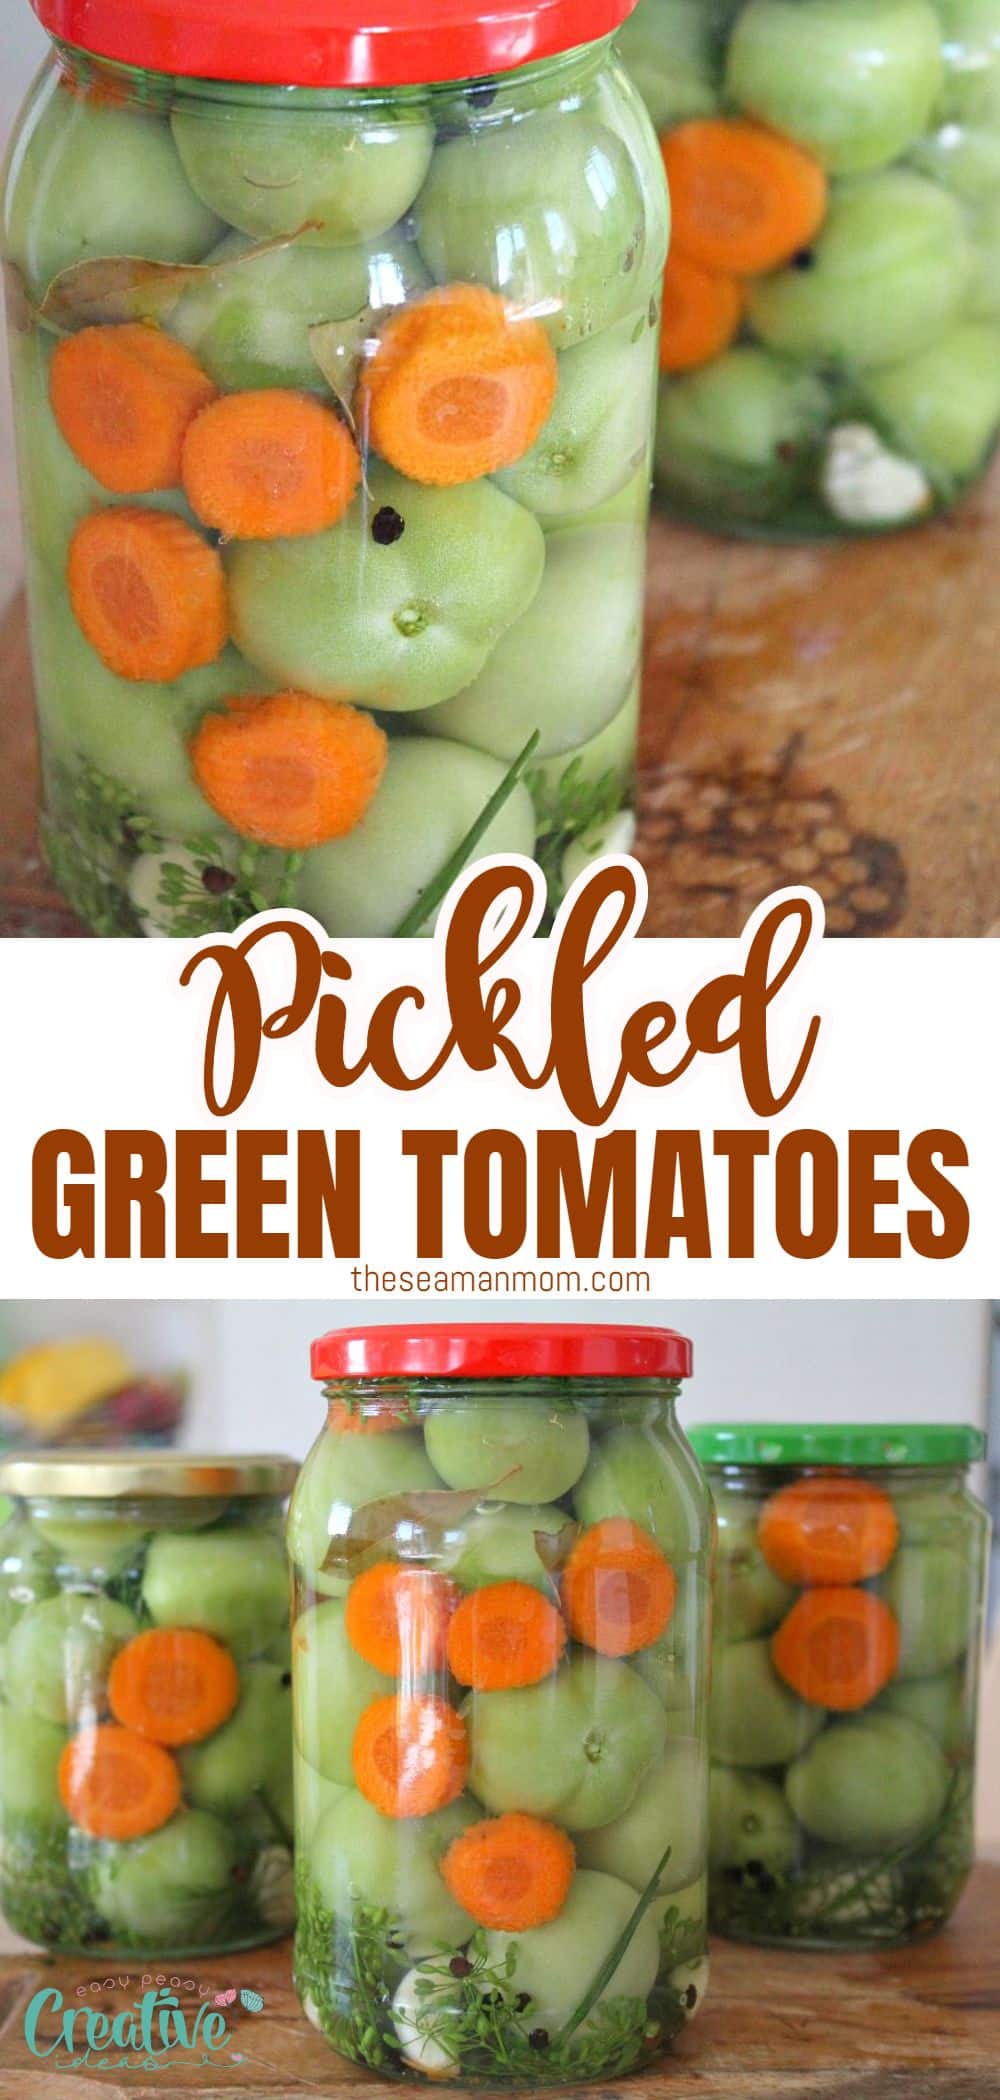 Brighten up your pantry with a classic family recipe for pickled green tomatoes. If you have an abundance of unripe tomatoes, this simple and delicious recipe will help you make canned pickled tomatoes that are sure to tantalize your taste buds! via @petroneagu